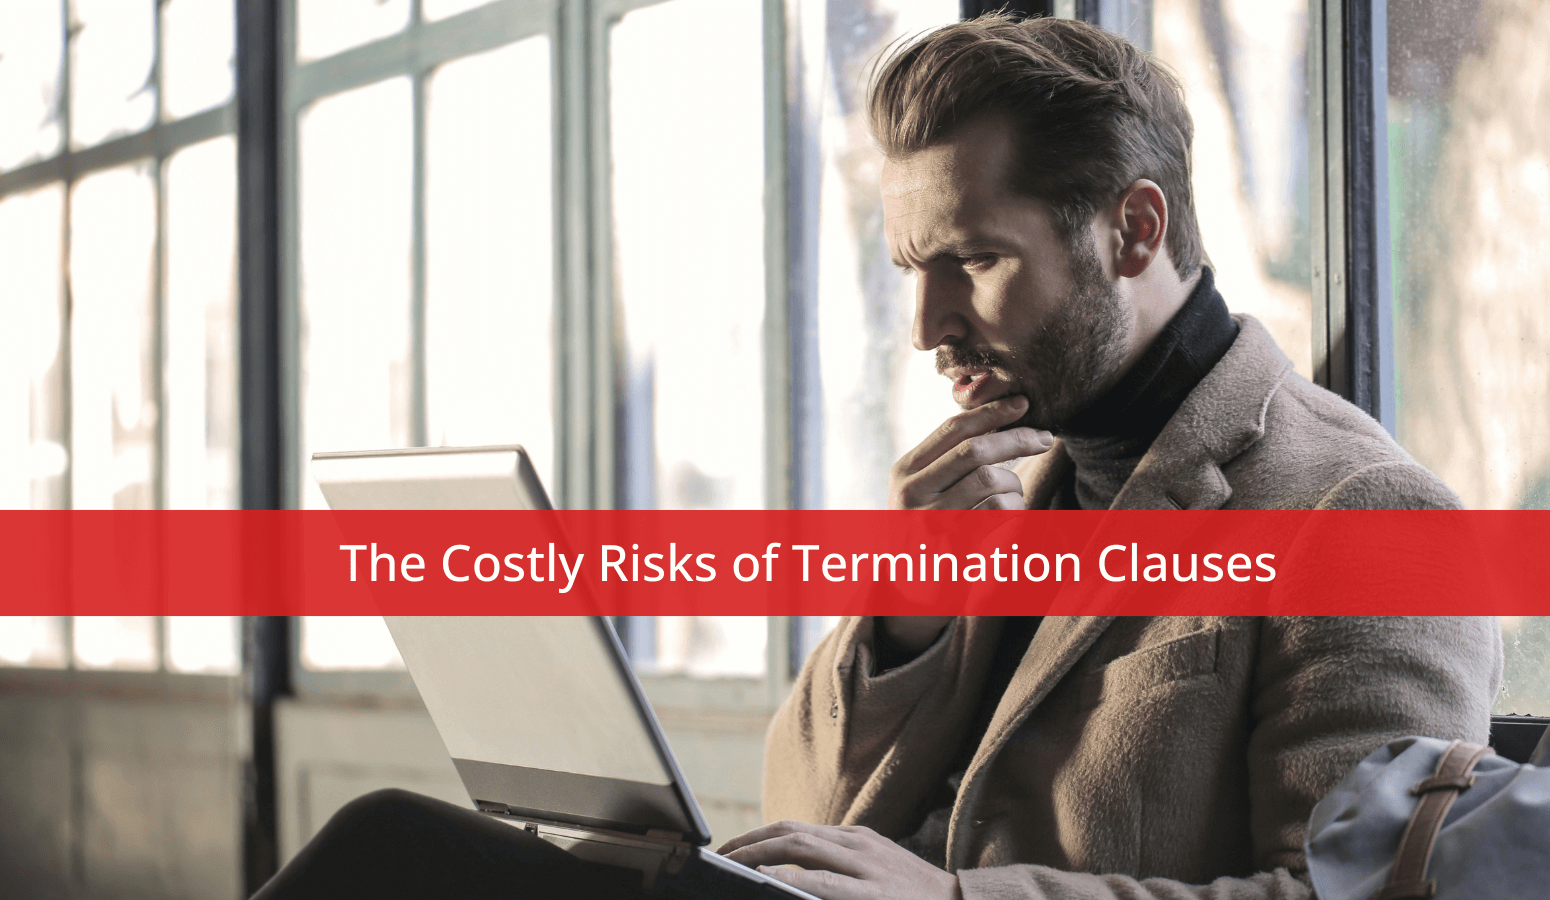 Featured image for “The Costly Risks of Termination Clauses”